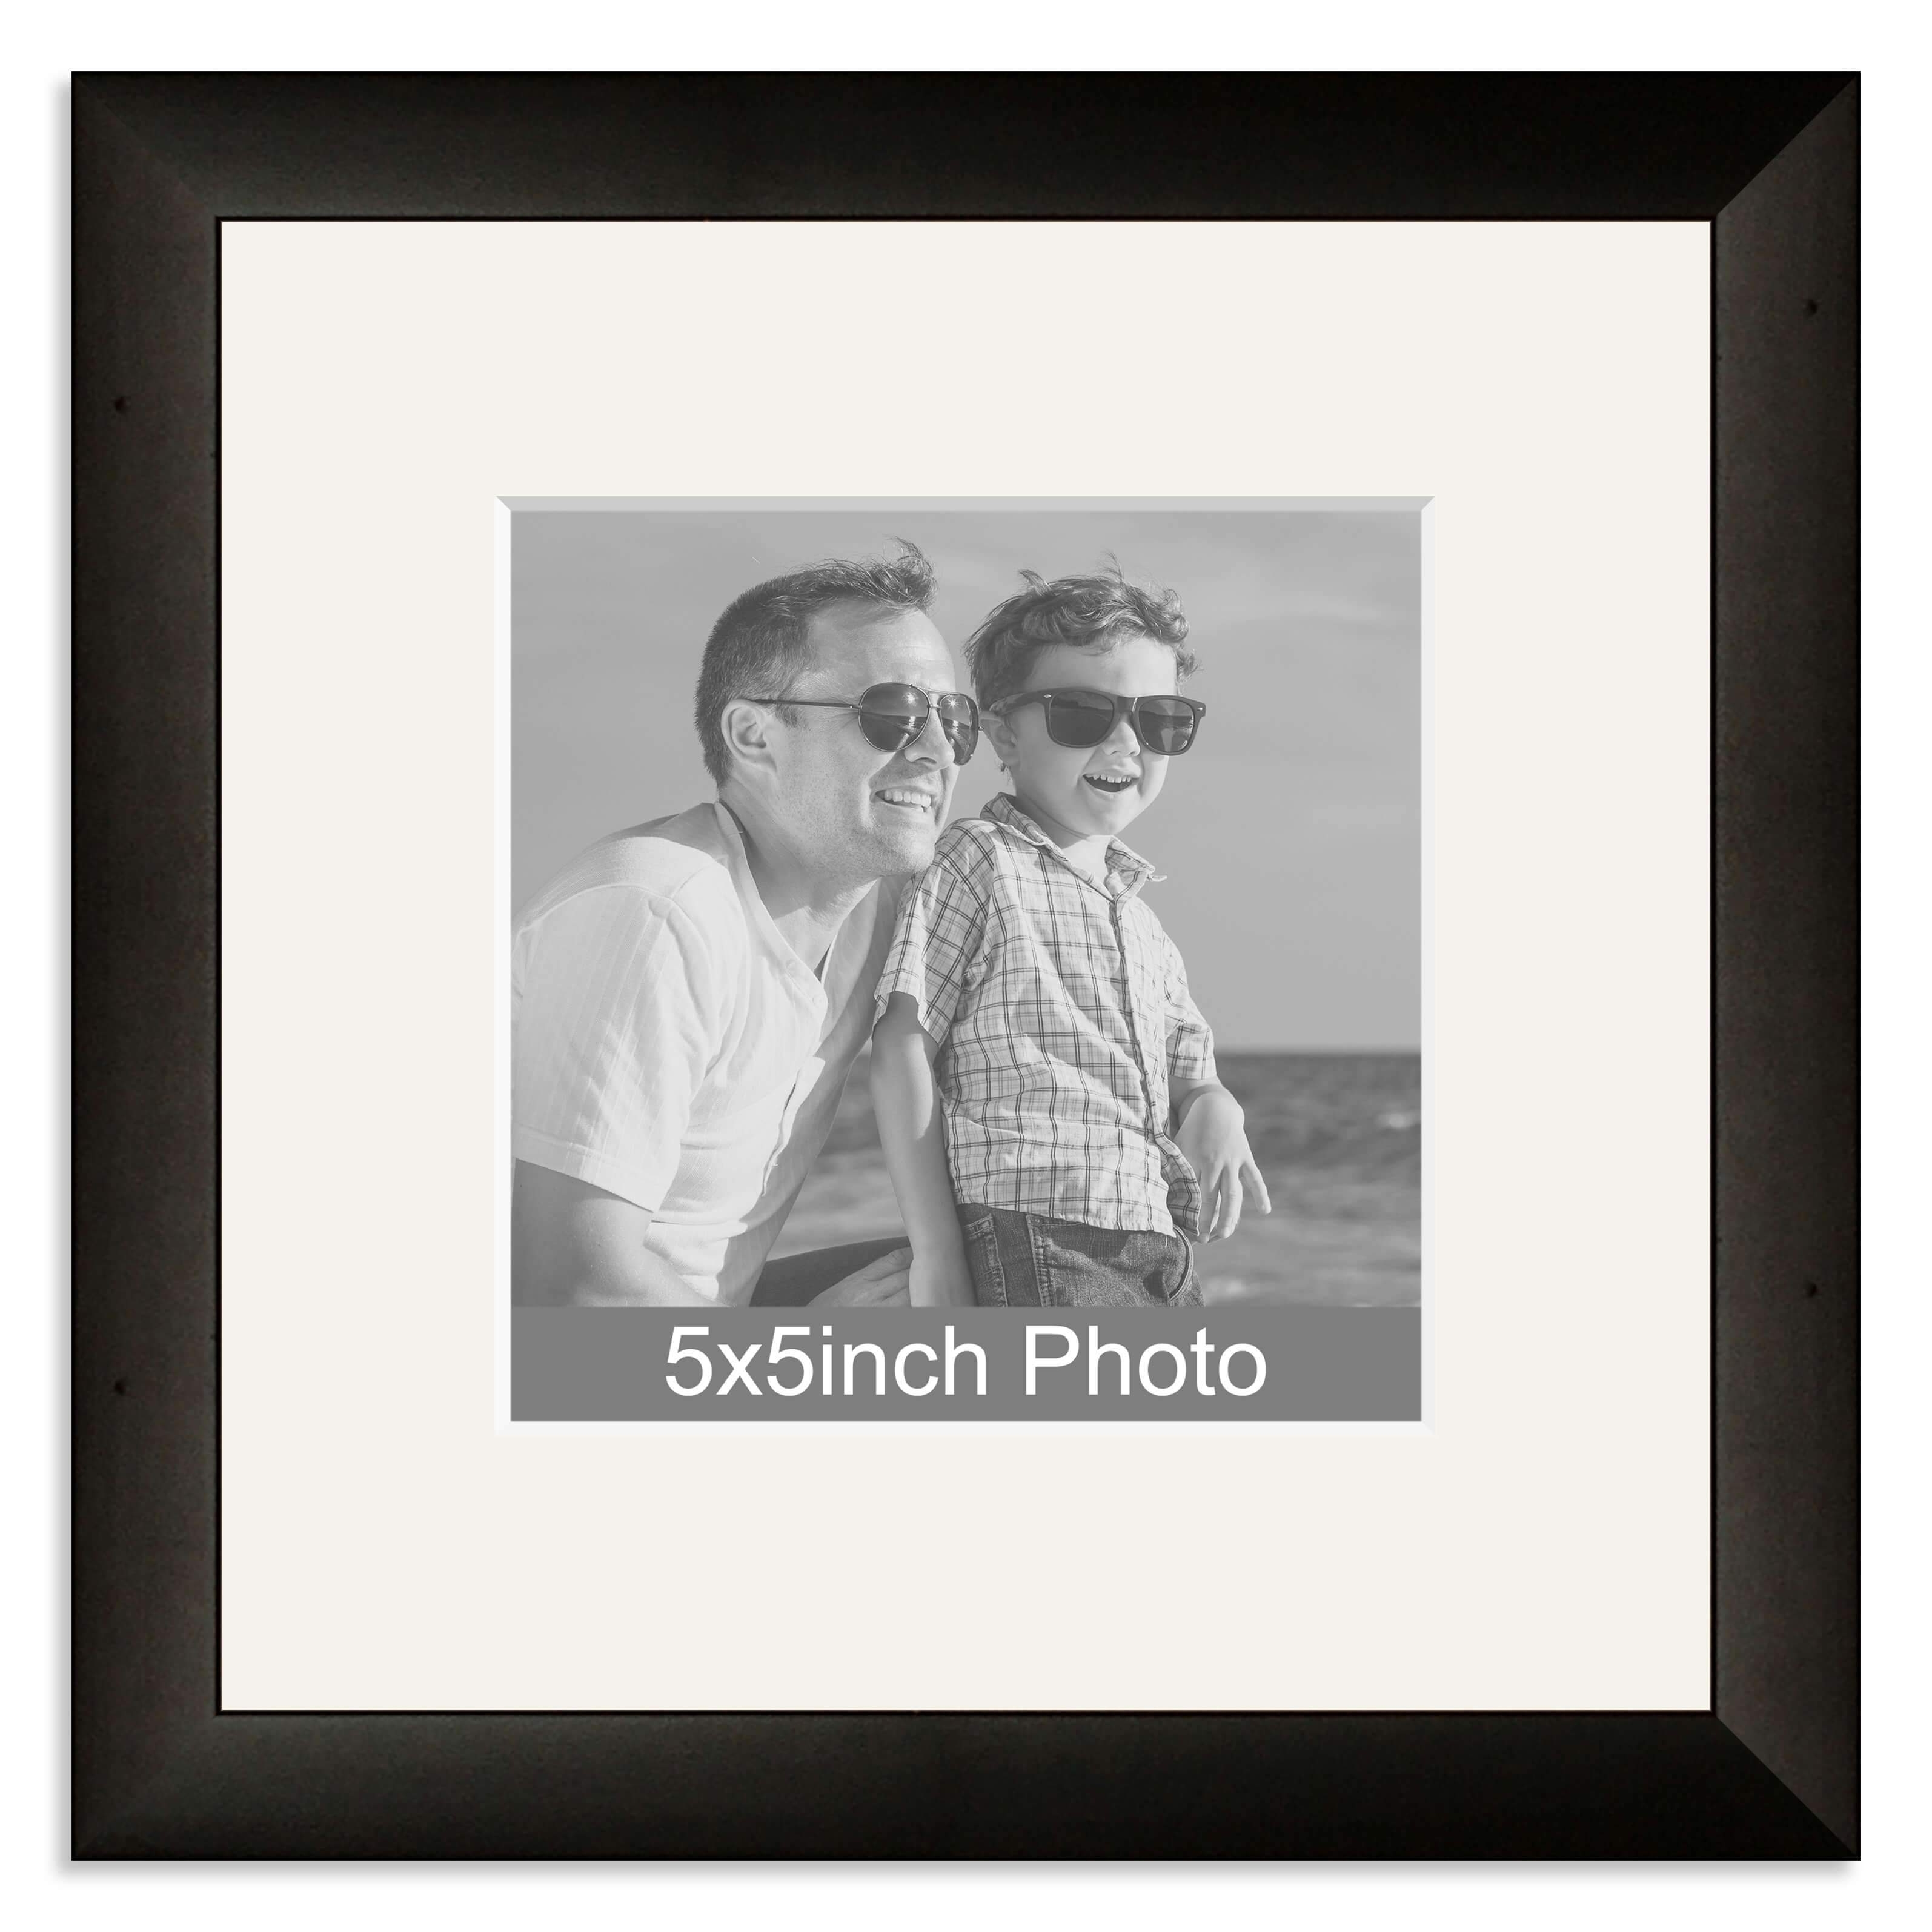 Black Wooden Photo Frame with mount for a 5x5in Photo – Photo uploaded below